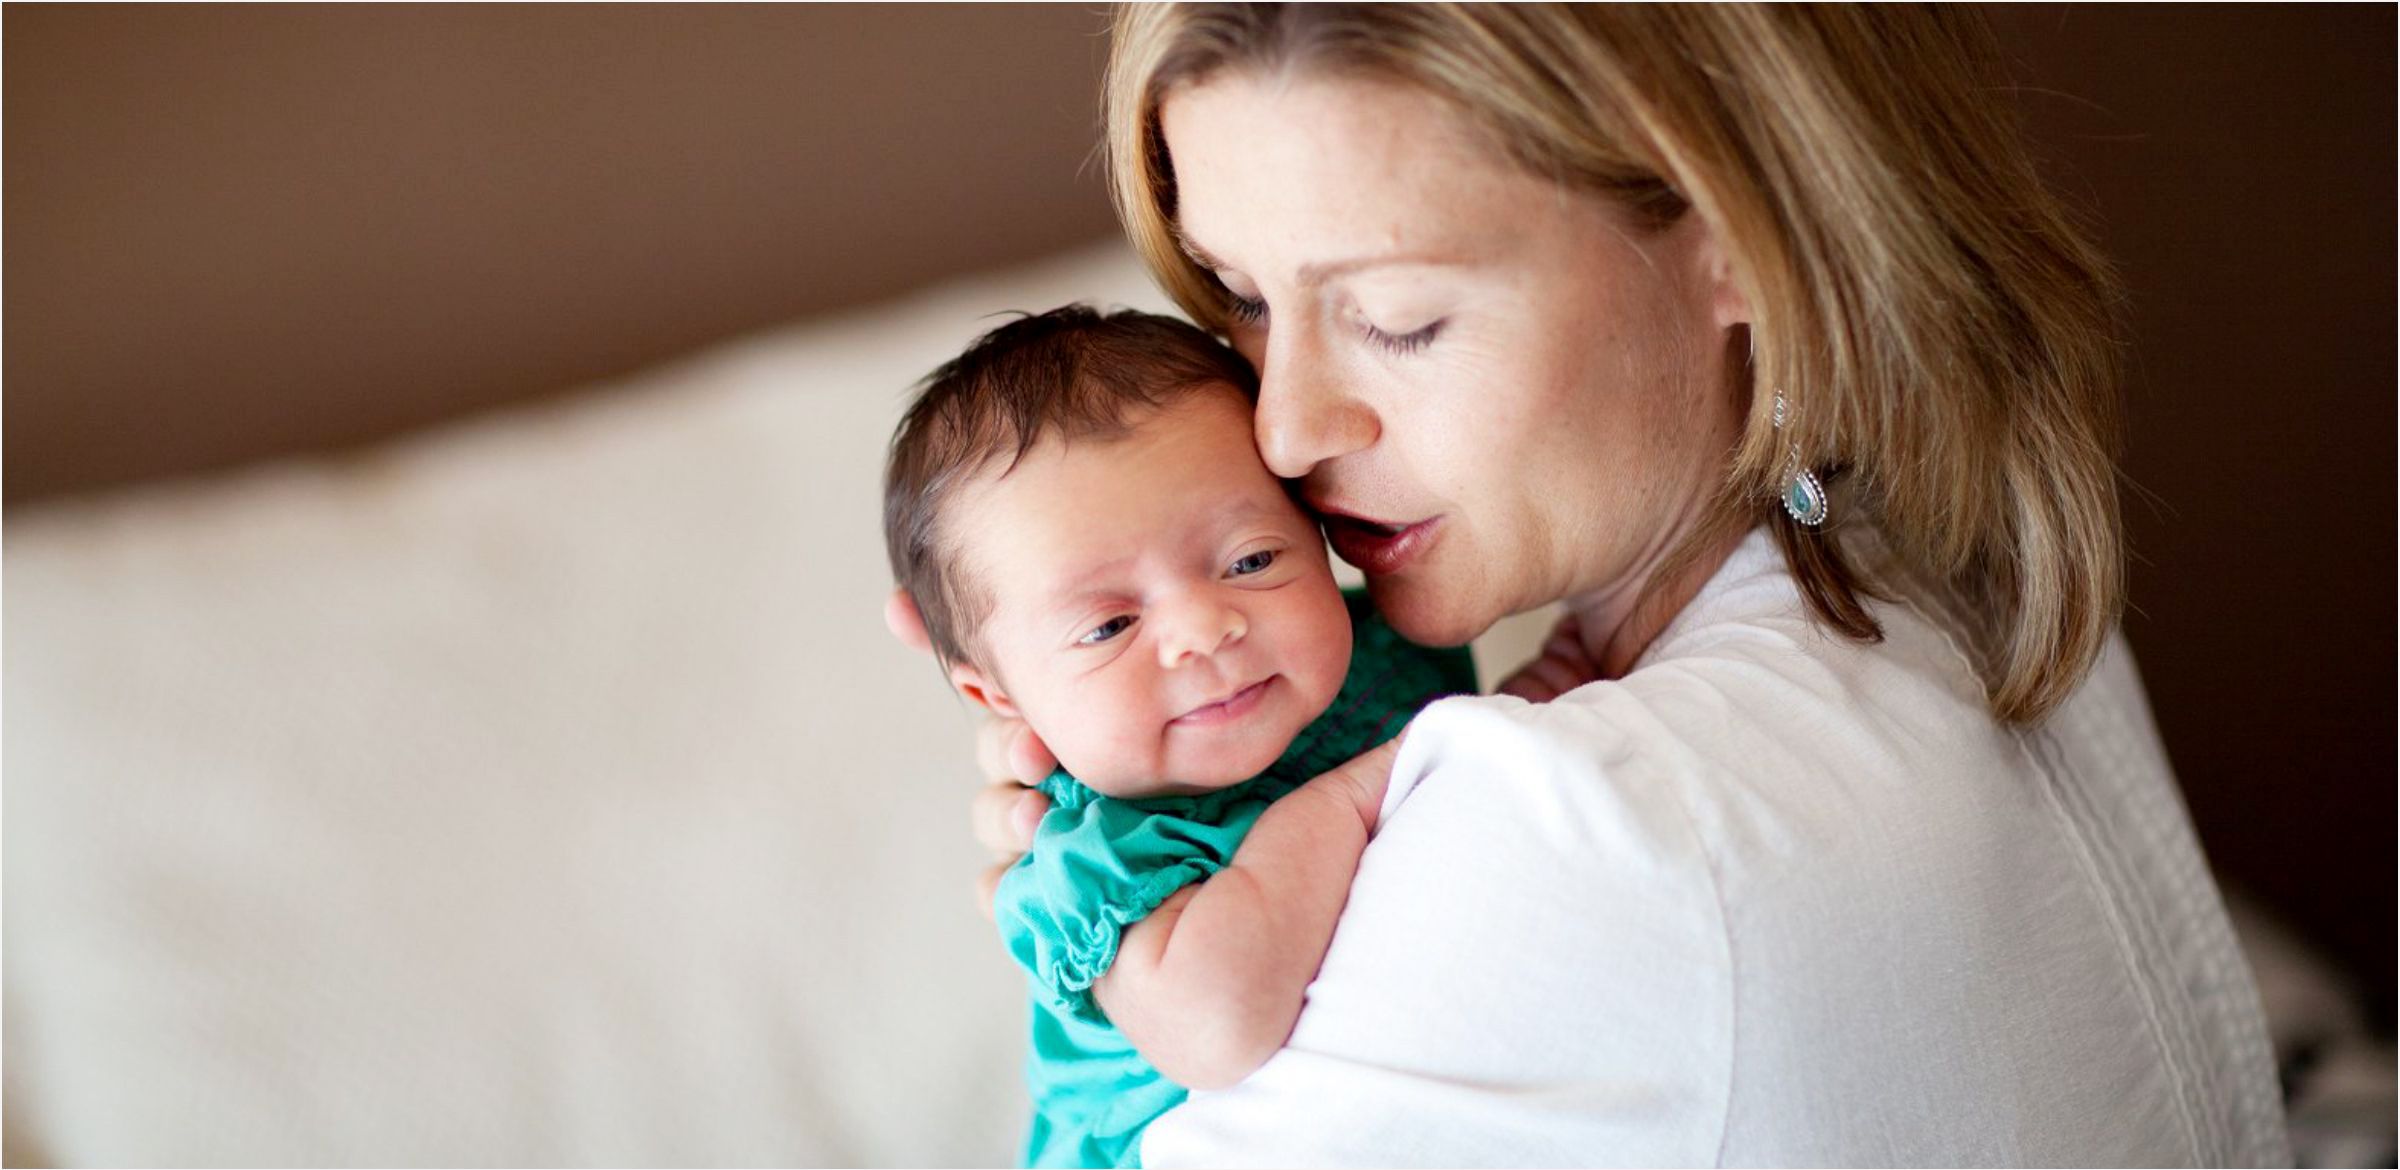 Mom-and-daughter-cuddle-up-at-home-location-newborn-photoshoot-0001